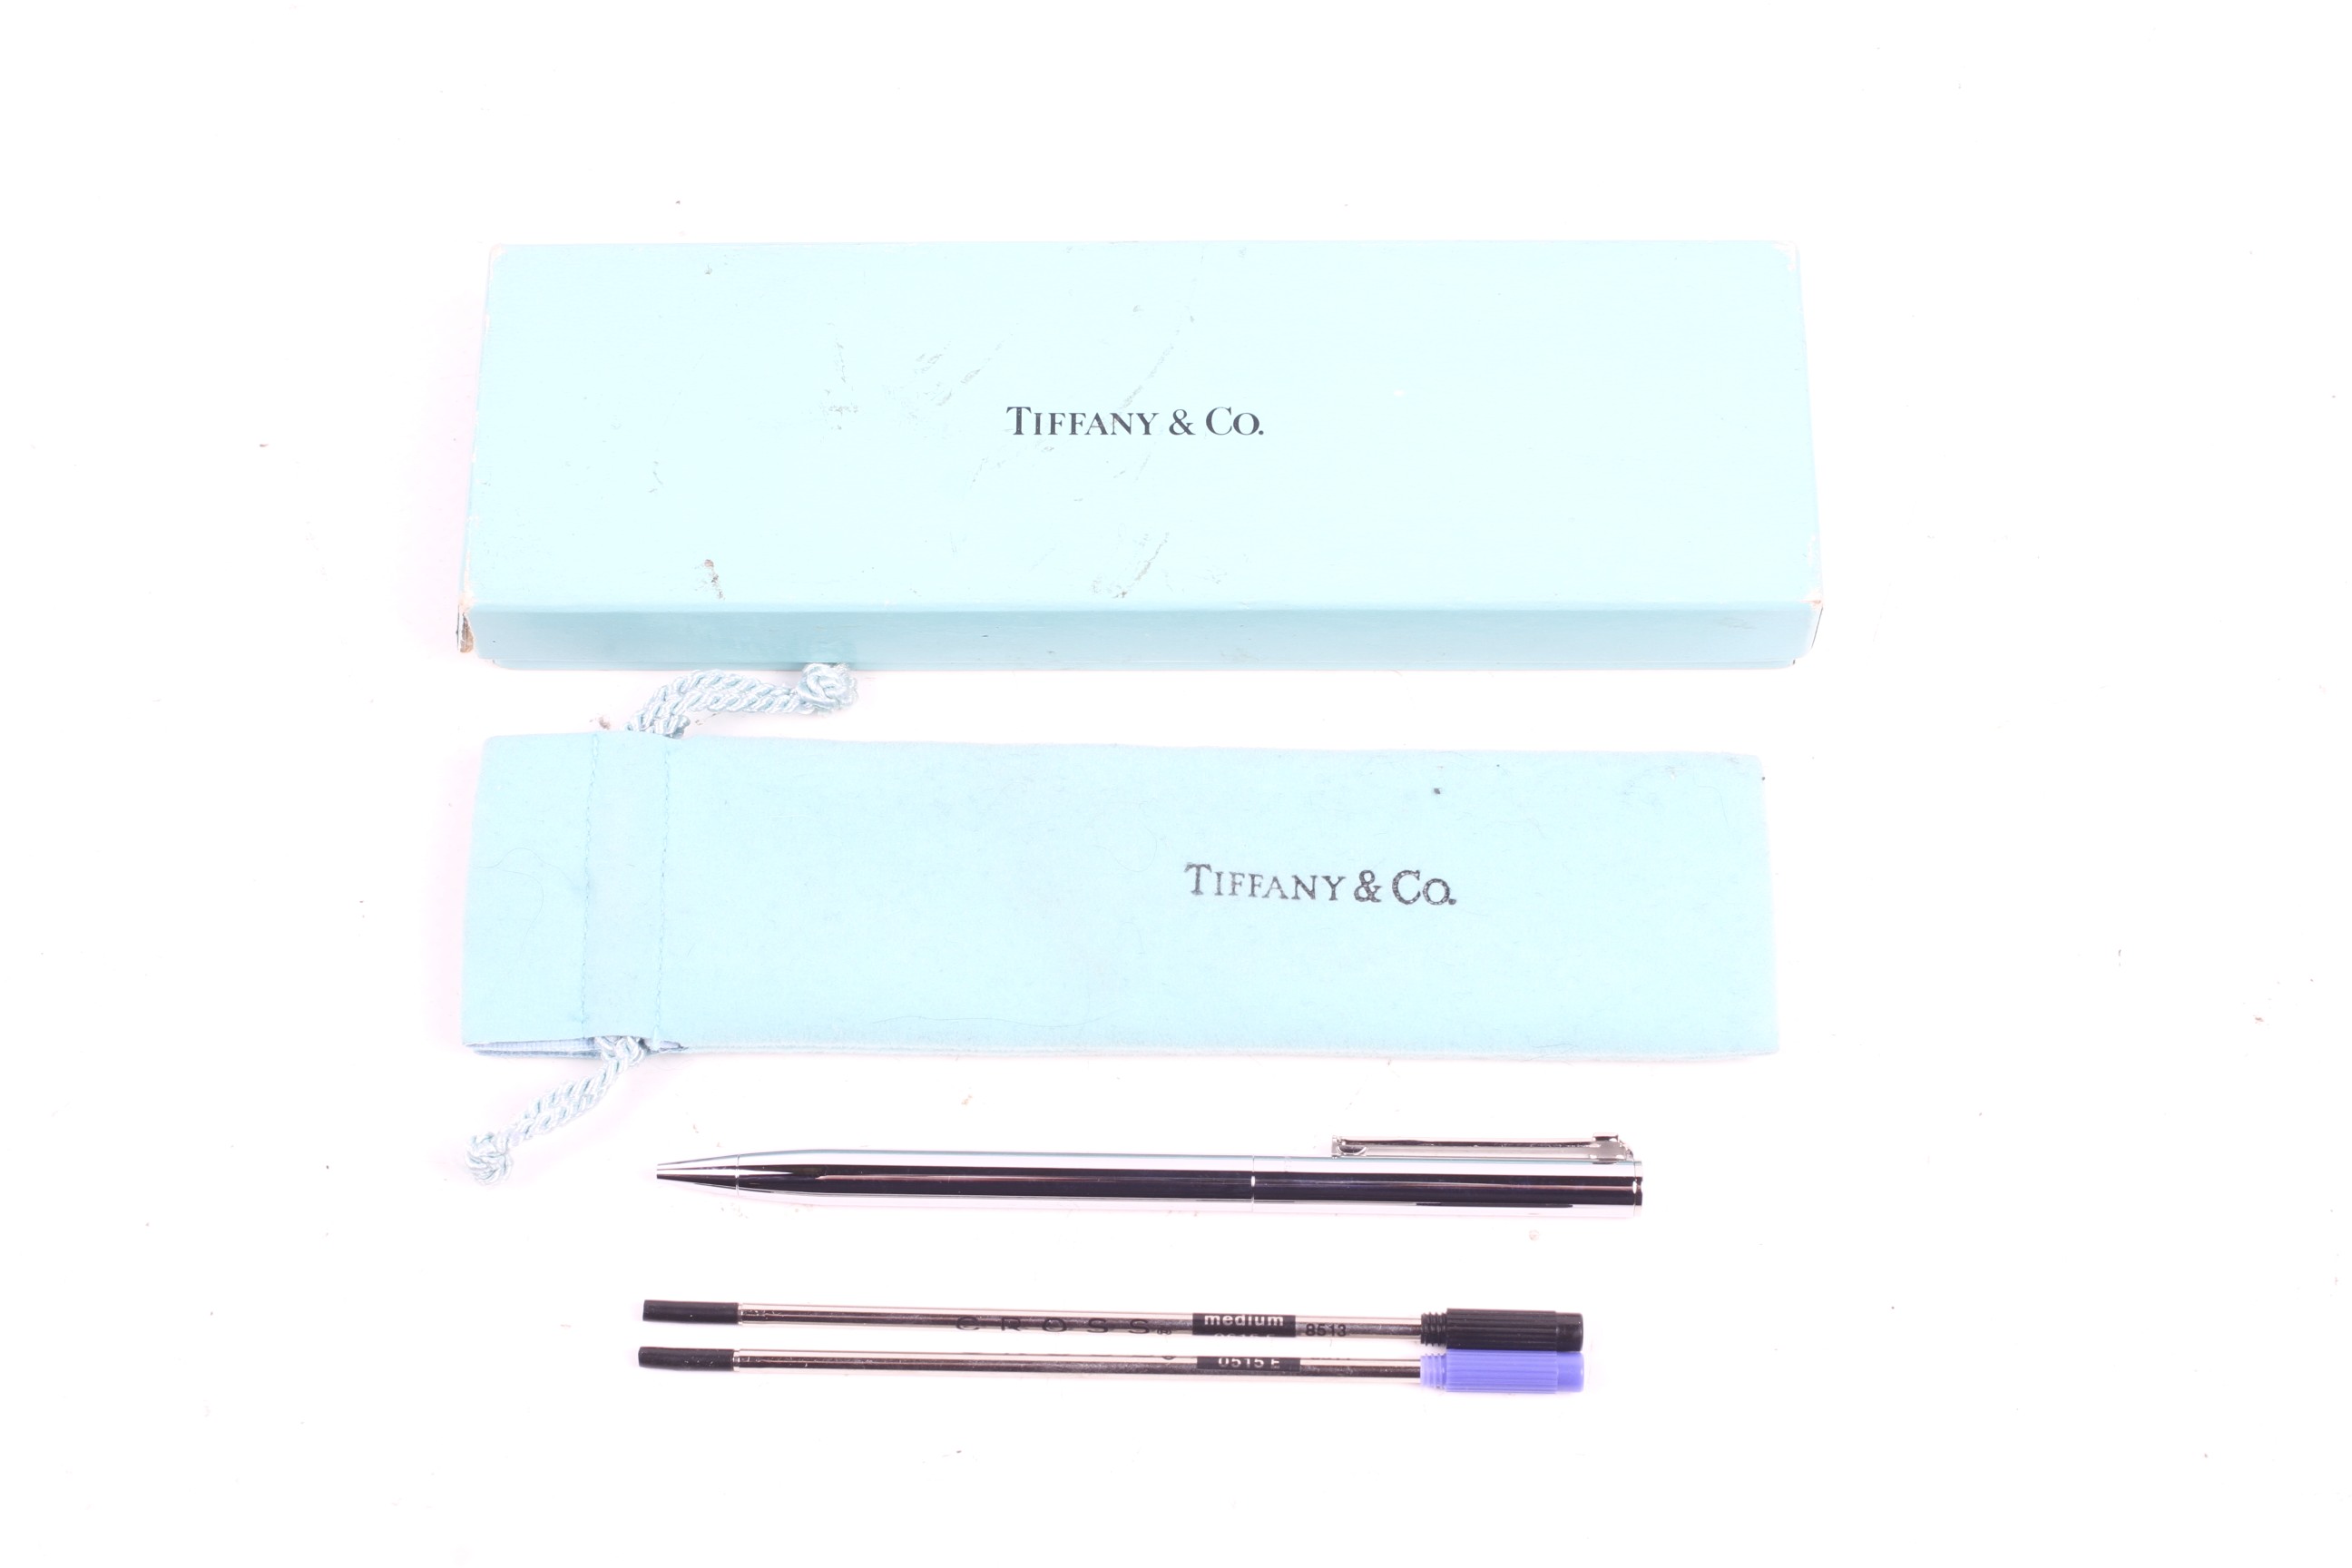 A 'Tiffany & Co USA' stainless steel ball point pen.